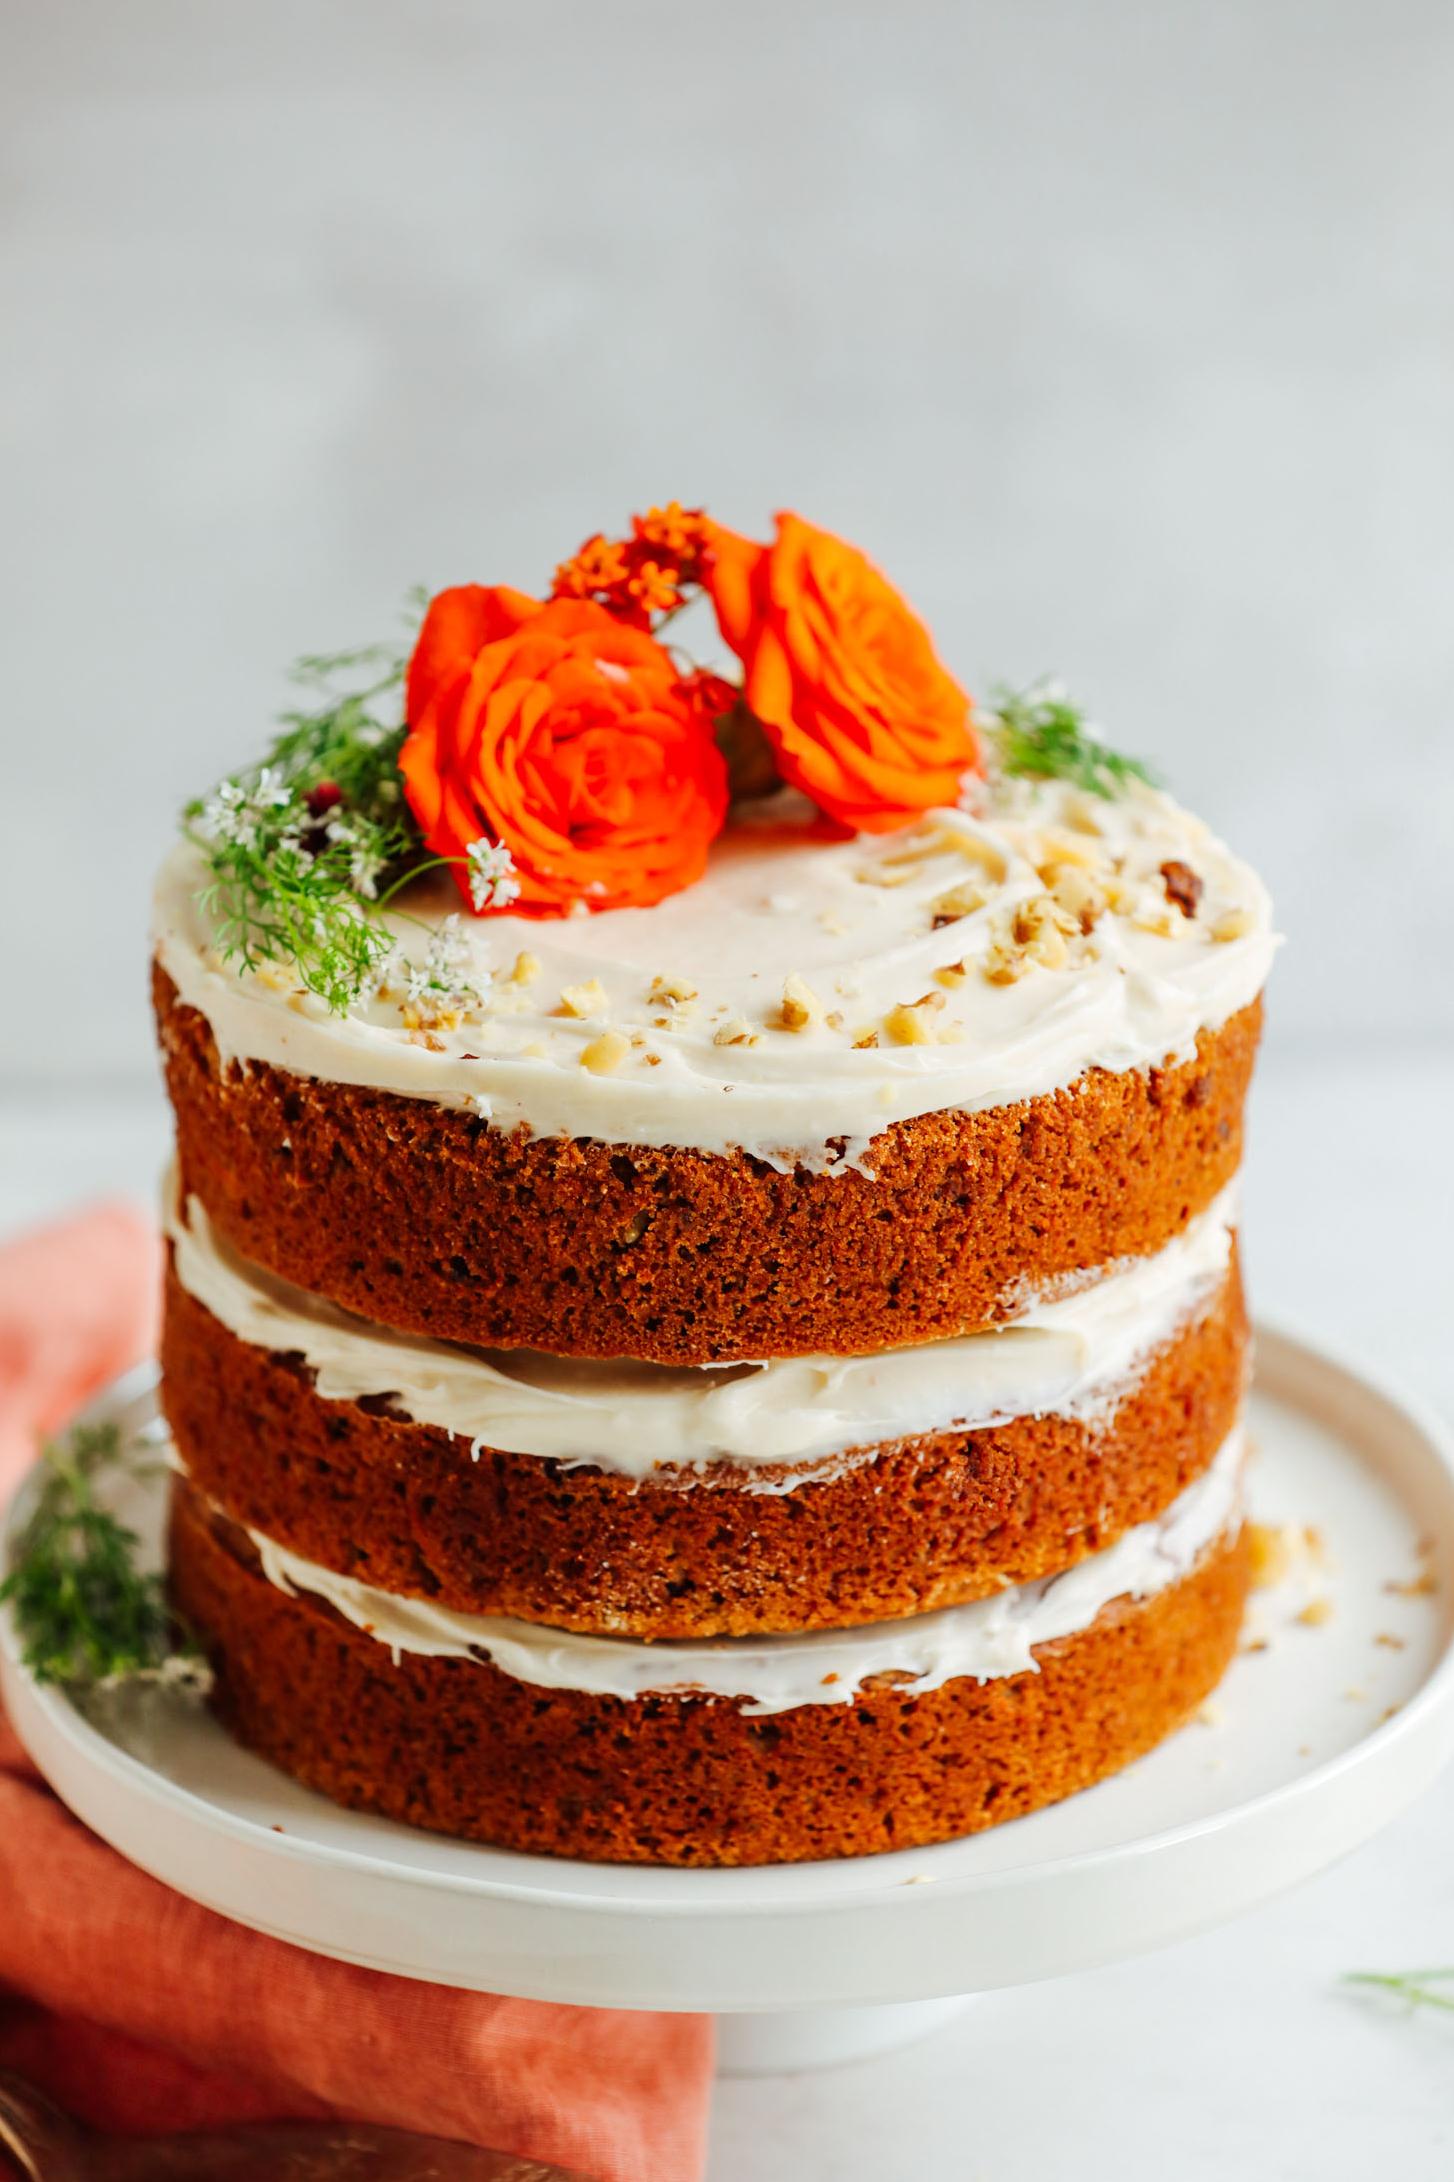  Vegetables can be dessert too, and this cake proves it.